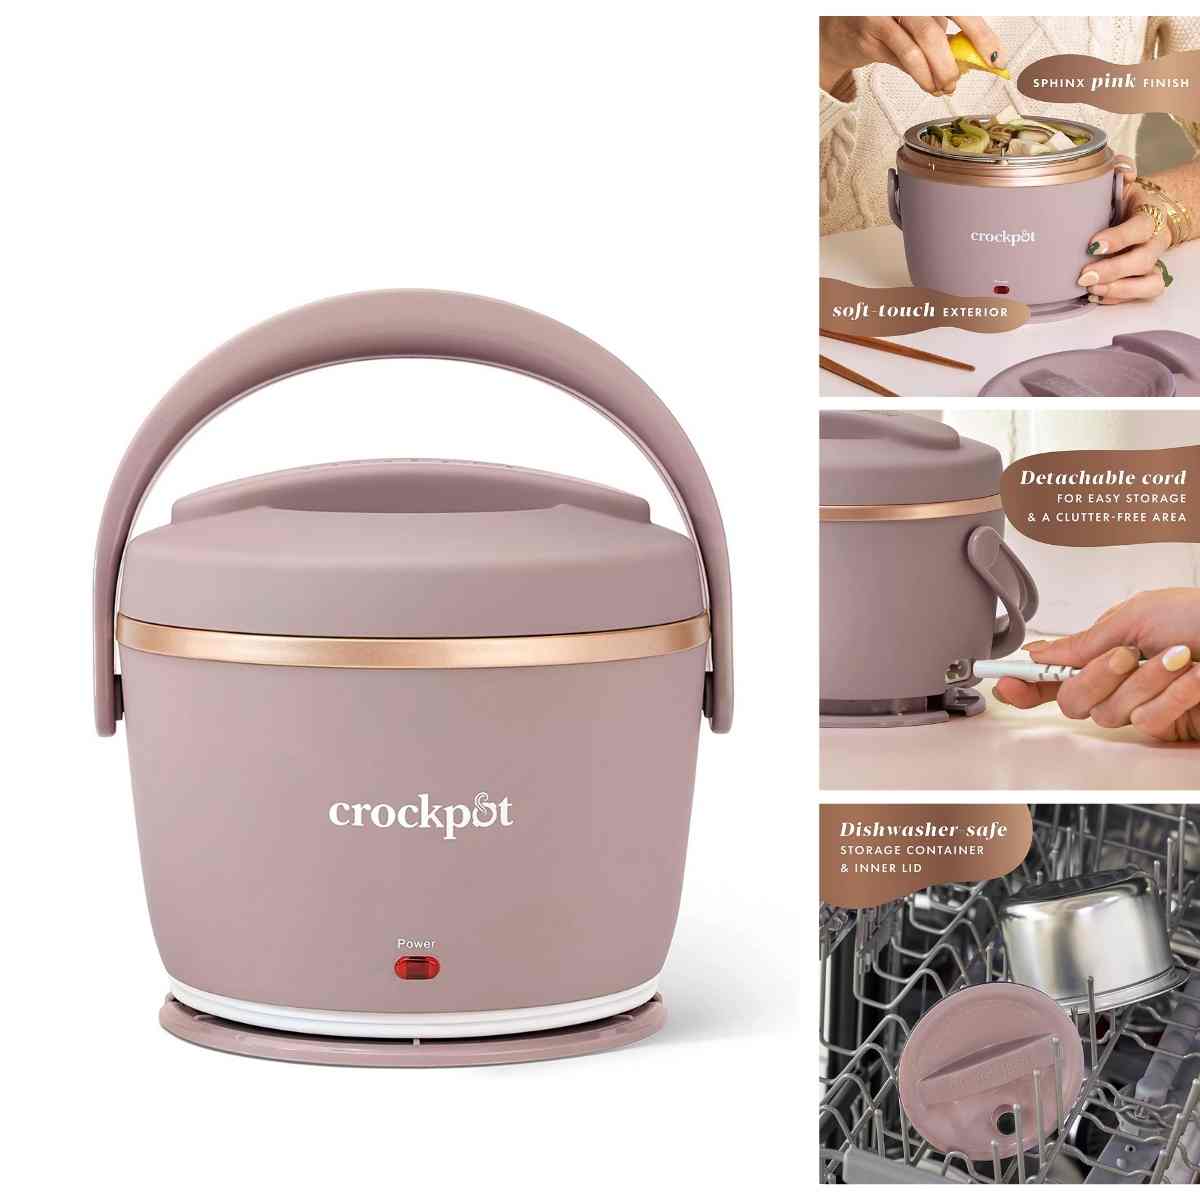 PRIME DAY DEAL: Crockpot Electric Lunch Box for $29.99 (Reg $44.99)